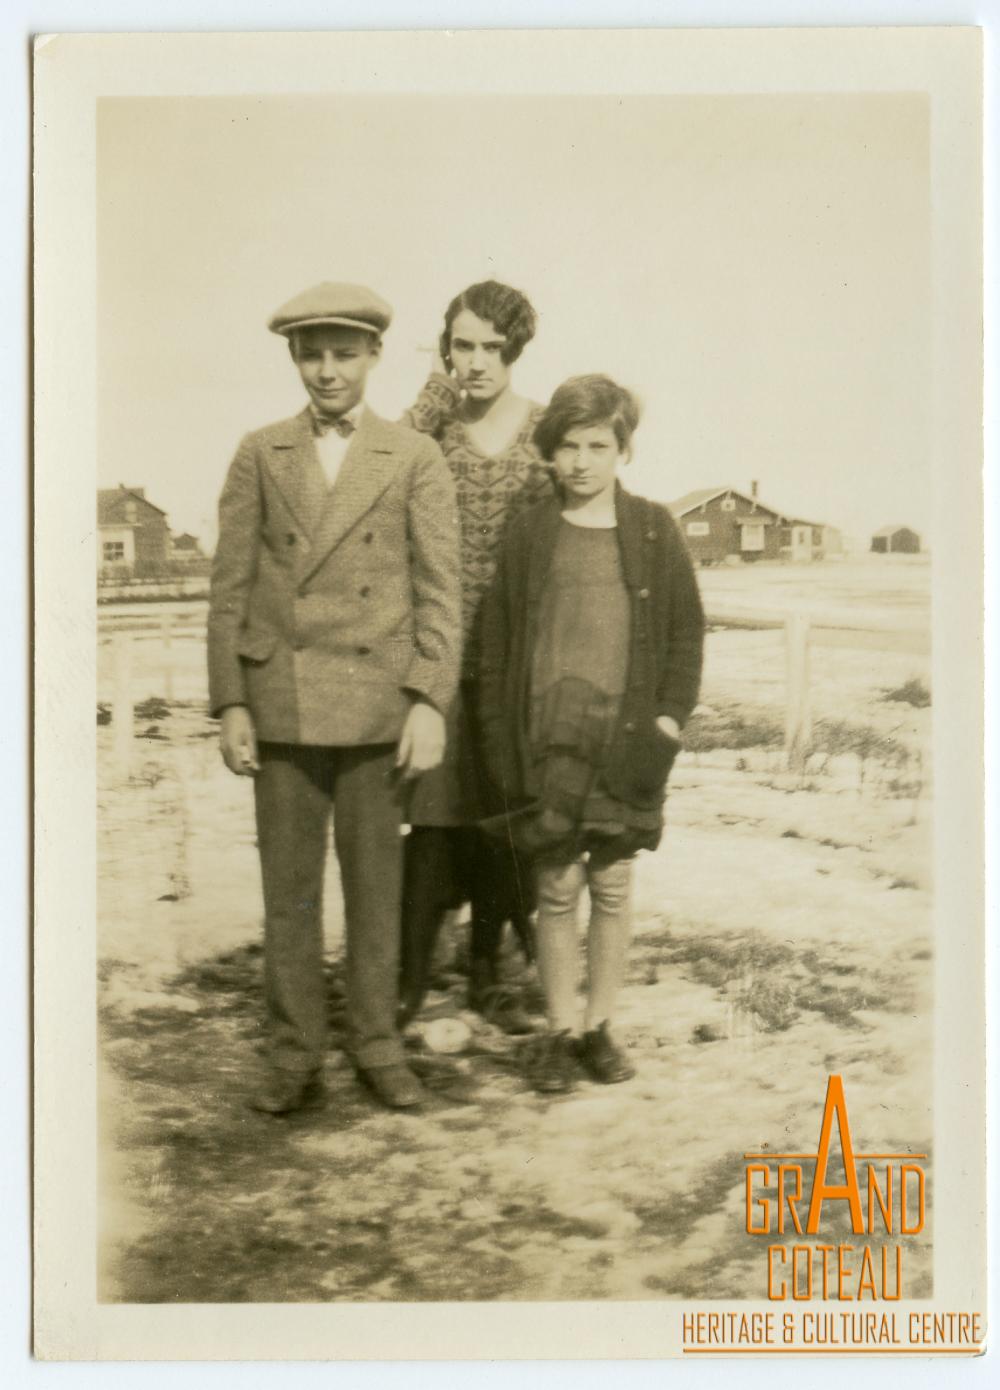 Photographic Print, unidentified young man, woman and girl